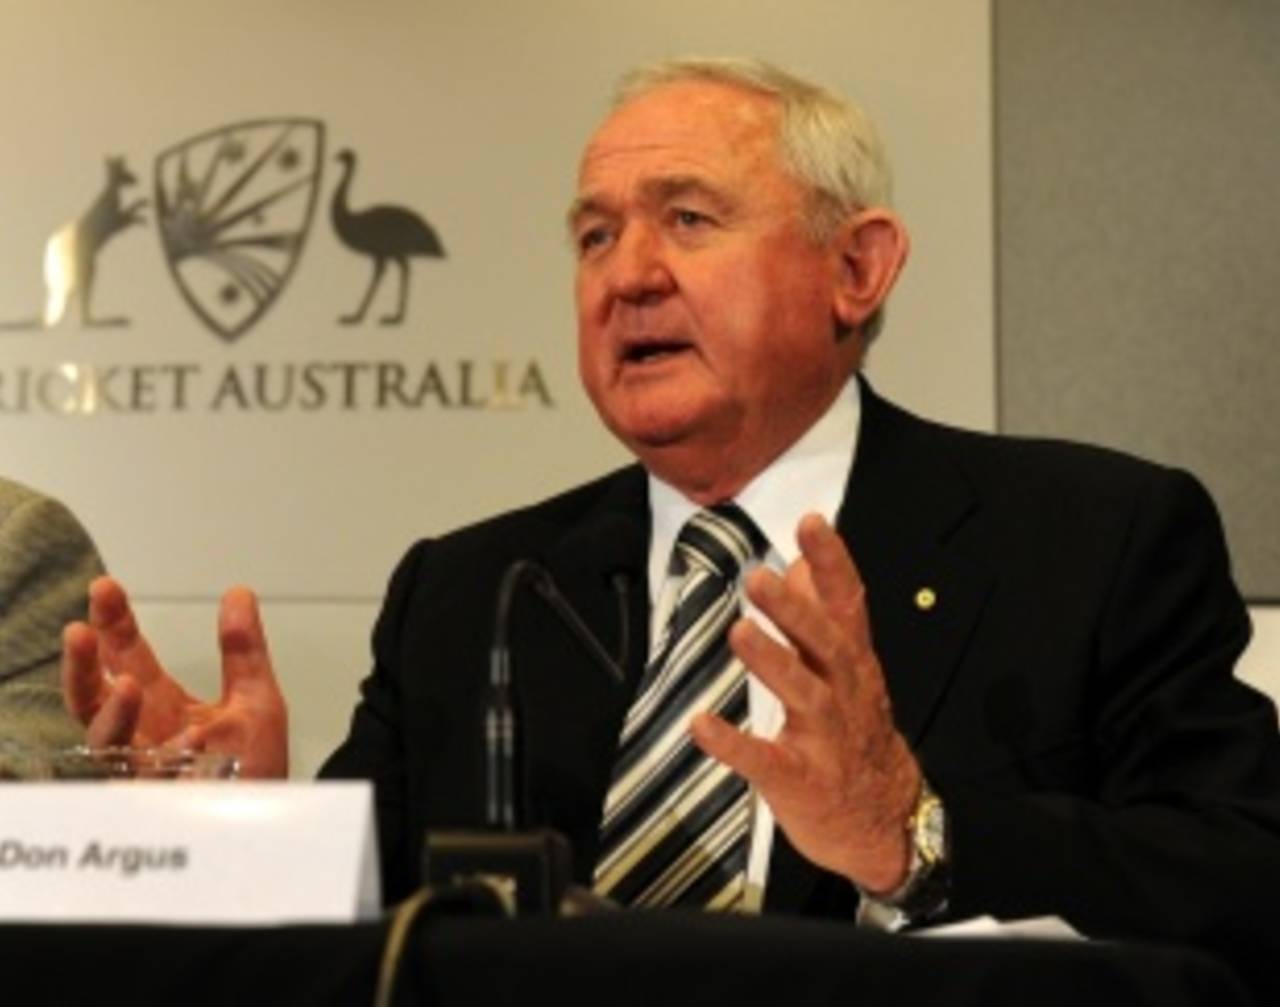 Don Argus, who helmed the review of the Australian cricket team's performance, will help select the first independent directors to serve on the Cricket Australia board&nbsp;&nbsp;&bull;&nbsp;&nbsp;Getty Images